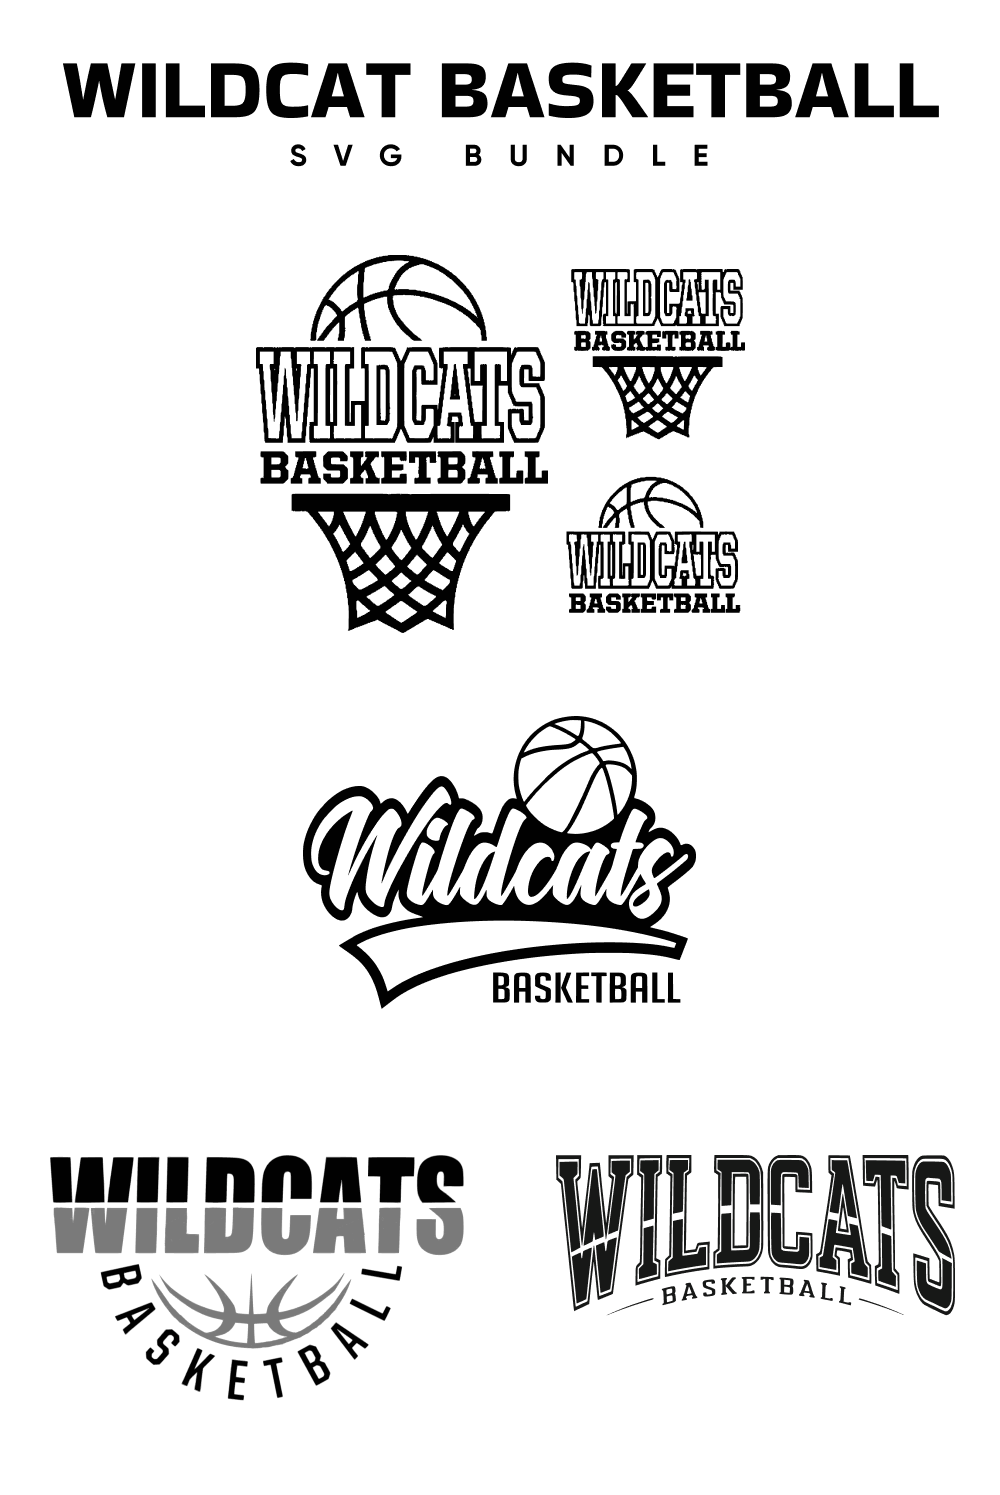 Bunch of different logos for a basketball team.